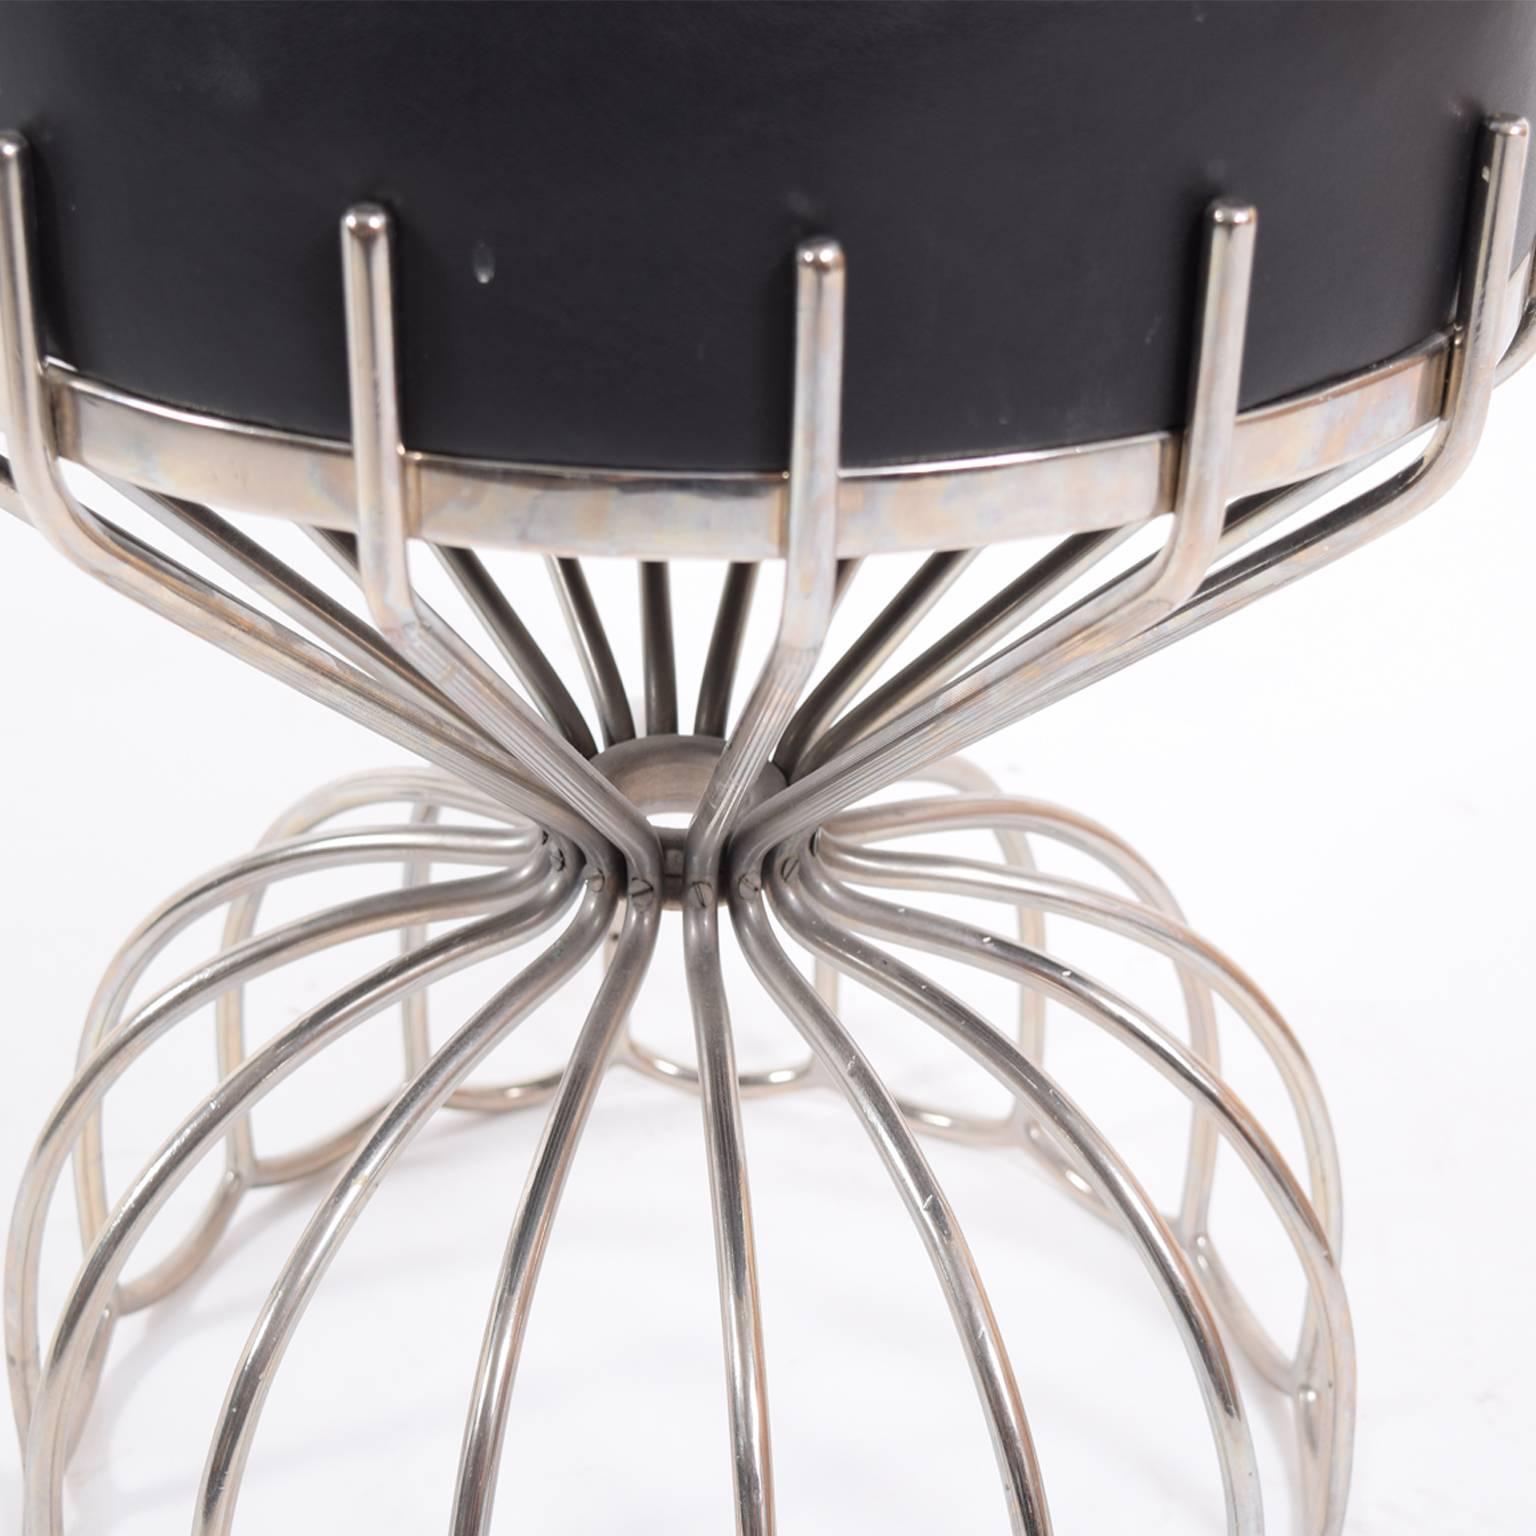 Unique and elegant French stool with bent stainless steel frame. Cushion upholstered with black leather.